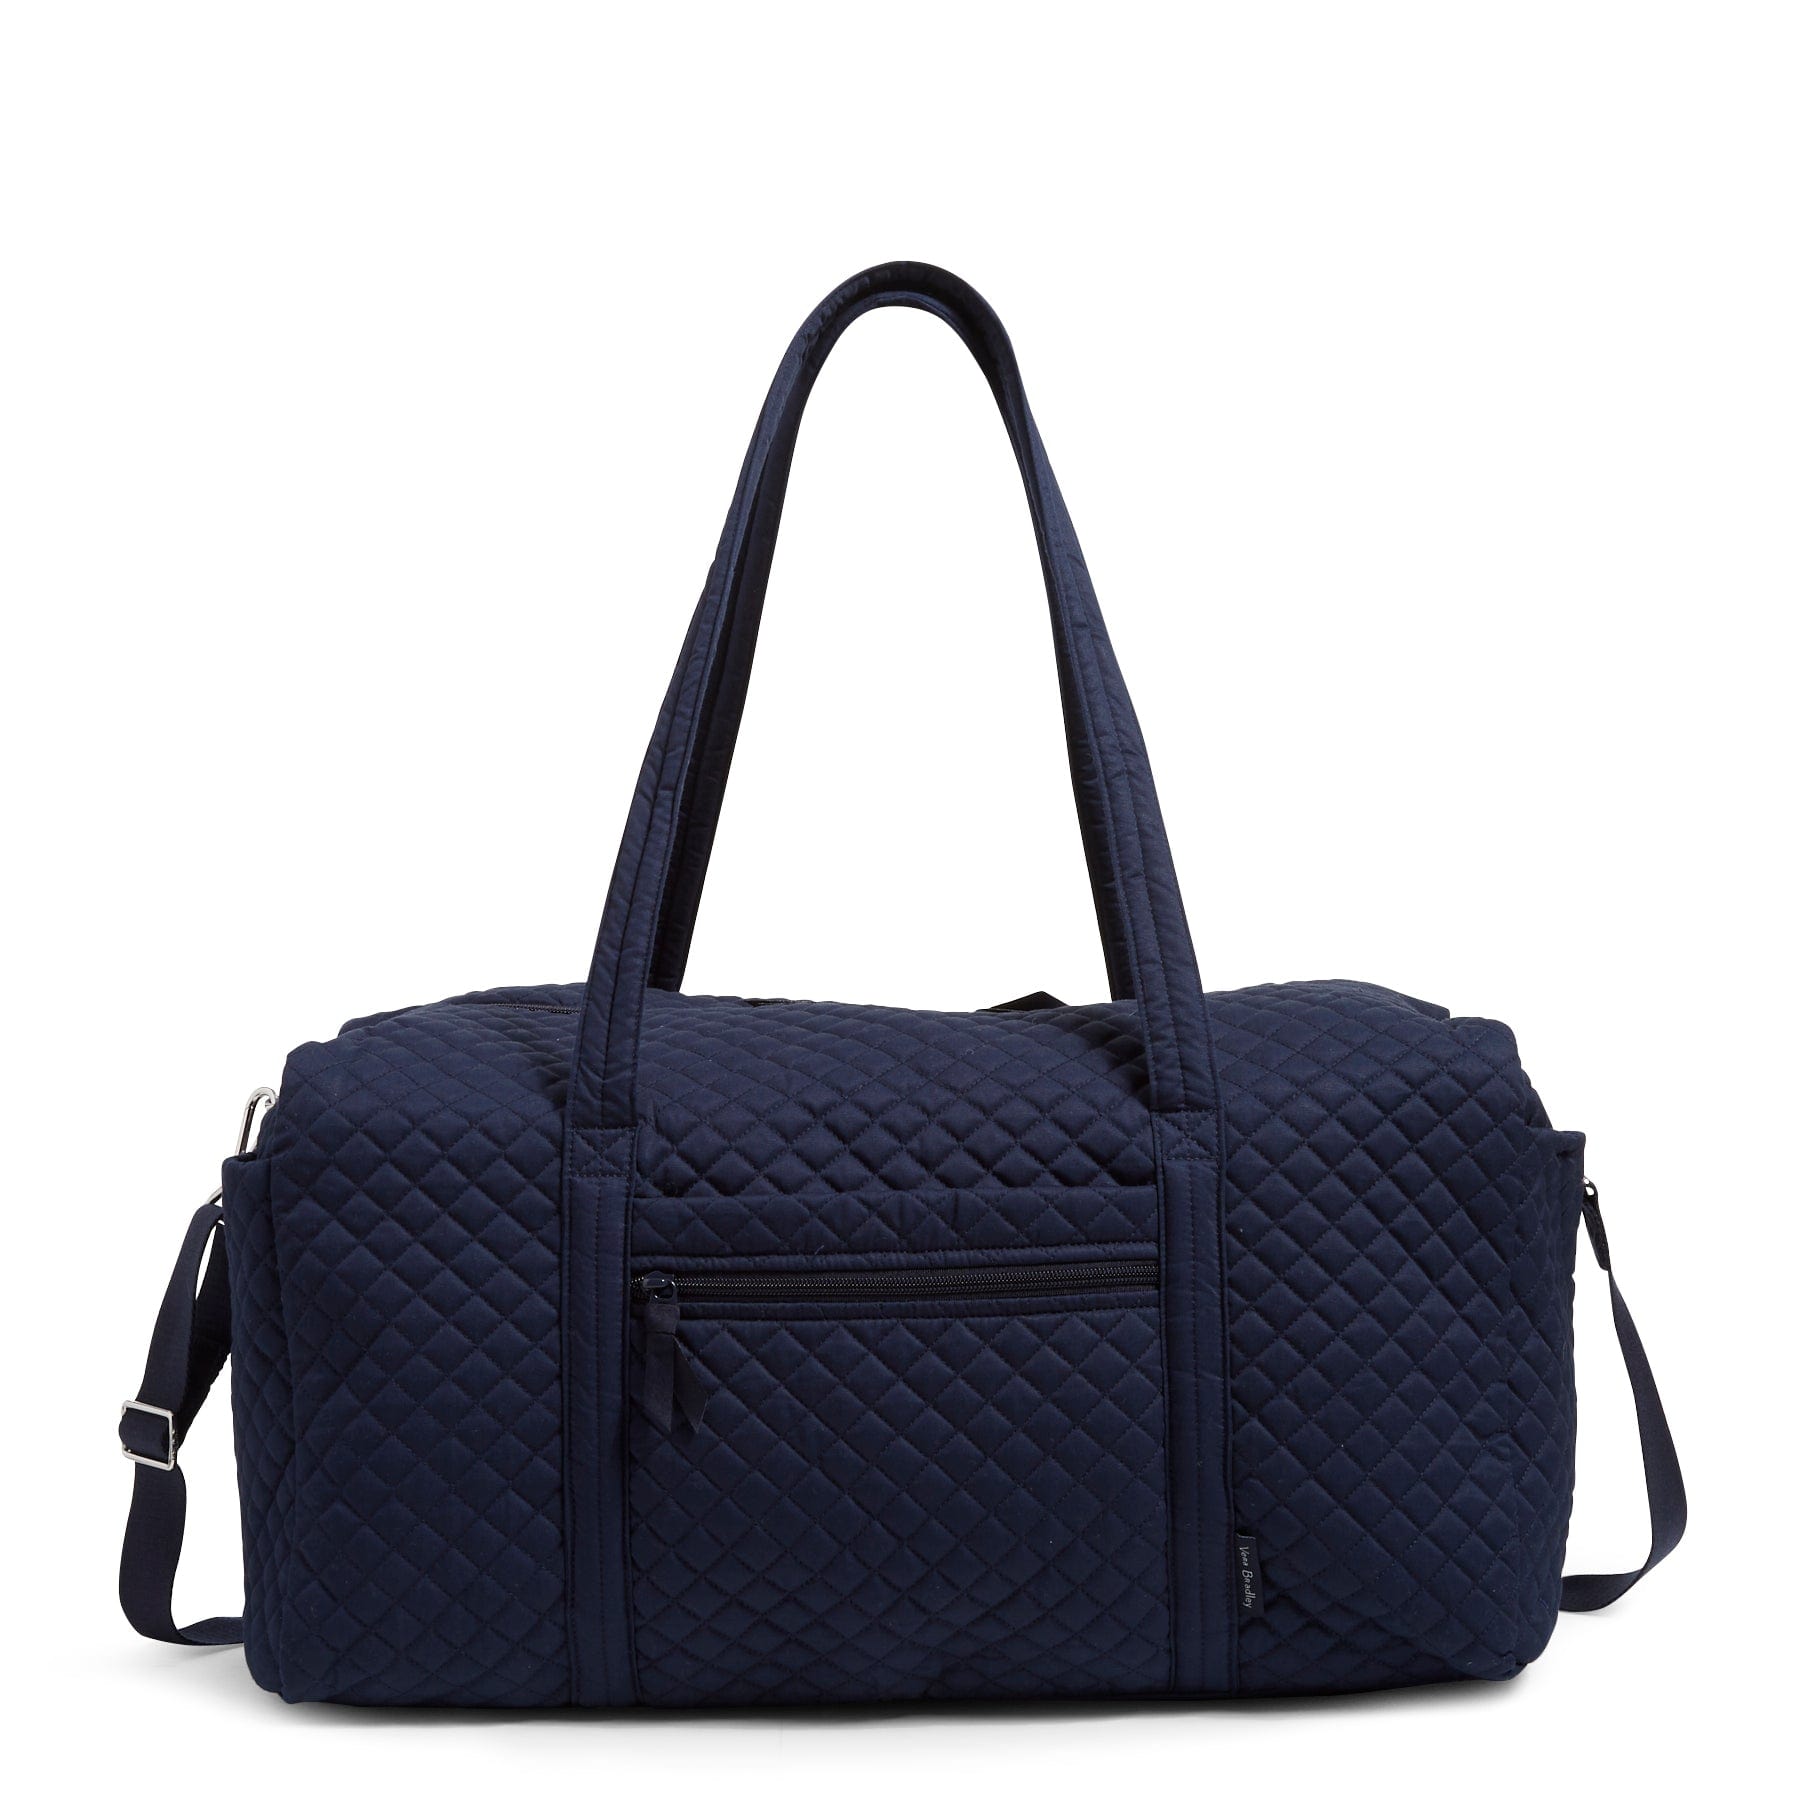 Large Travel Duffel Bag-Recycled Cotton Classic Navy-Image 1-Vera Bradley